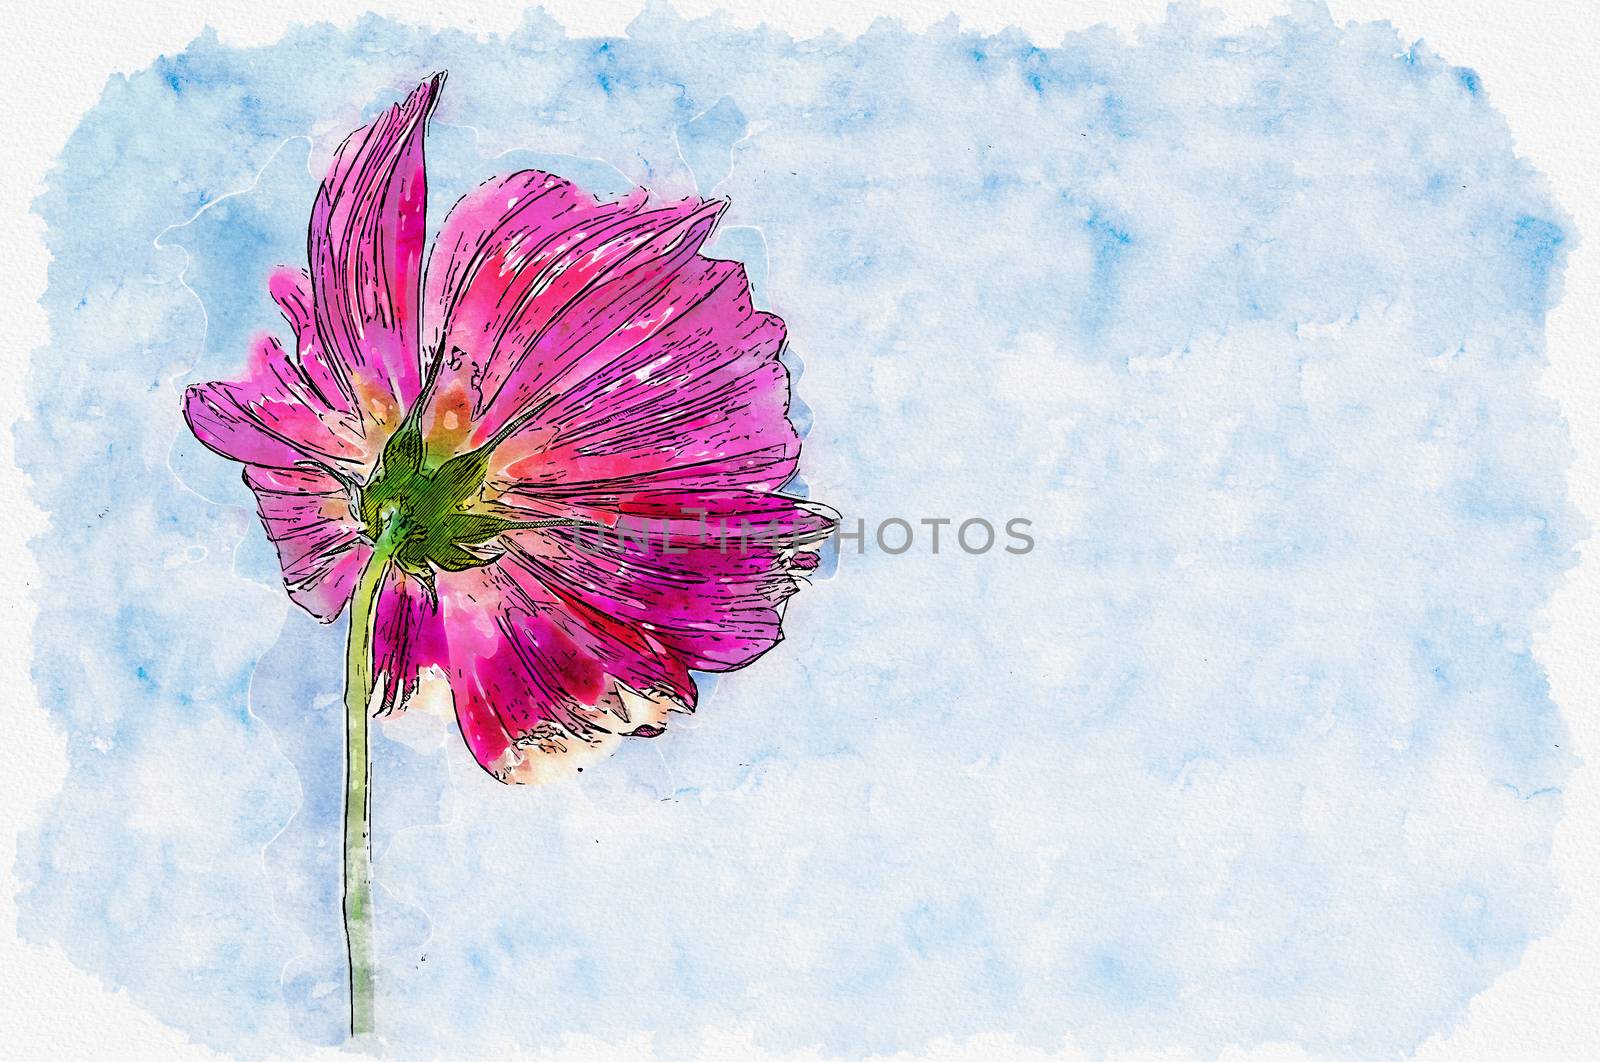 Watercolor painting illustration of Pink cosmos flower in blue s by pkproject